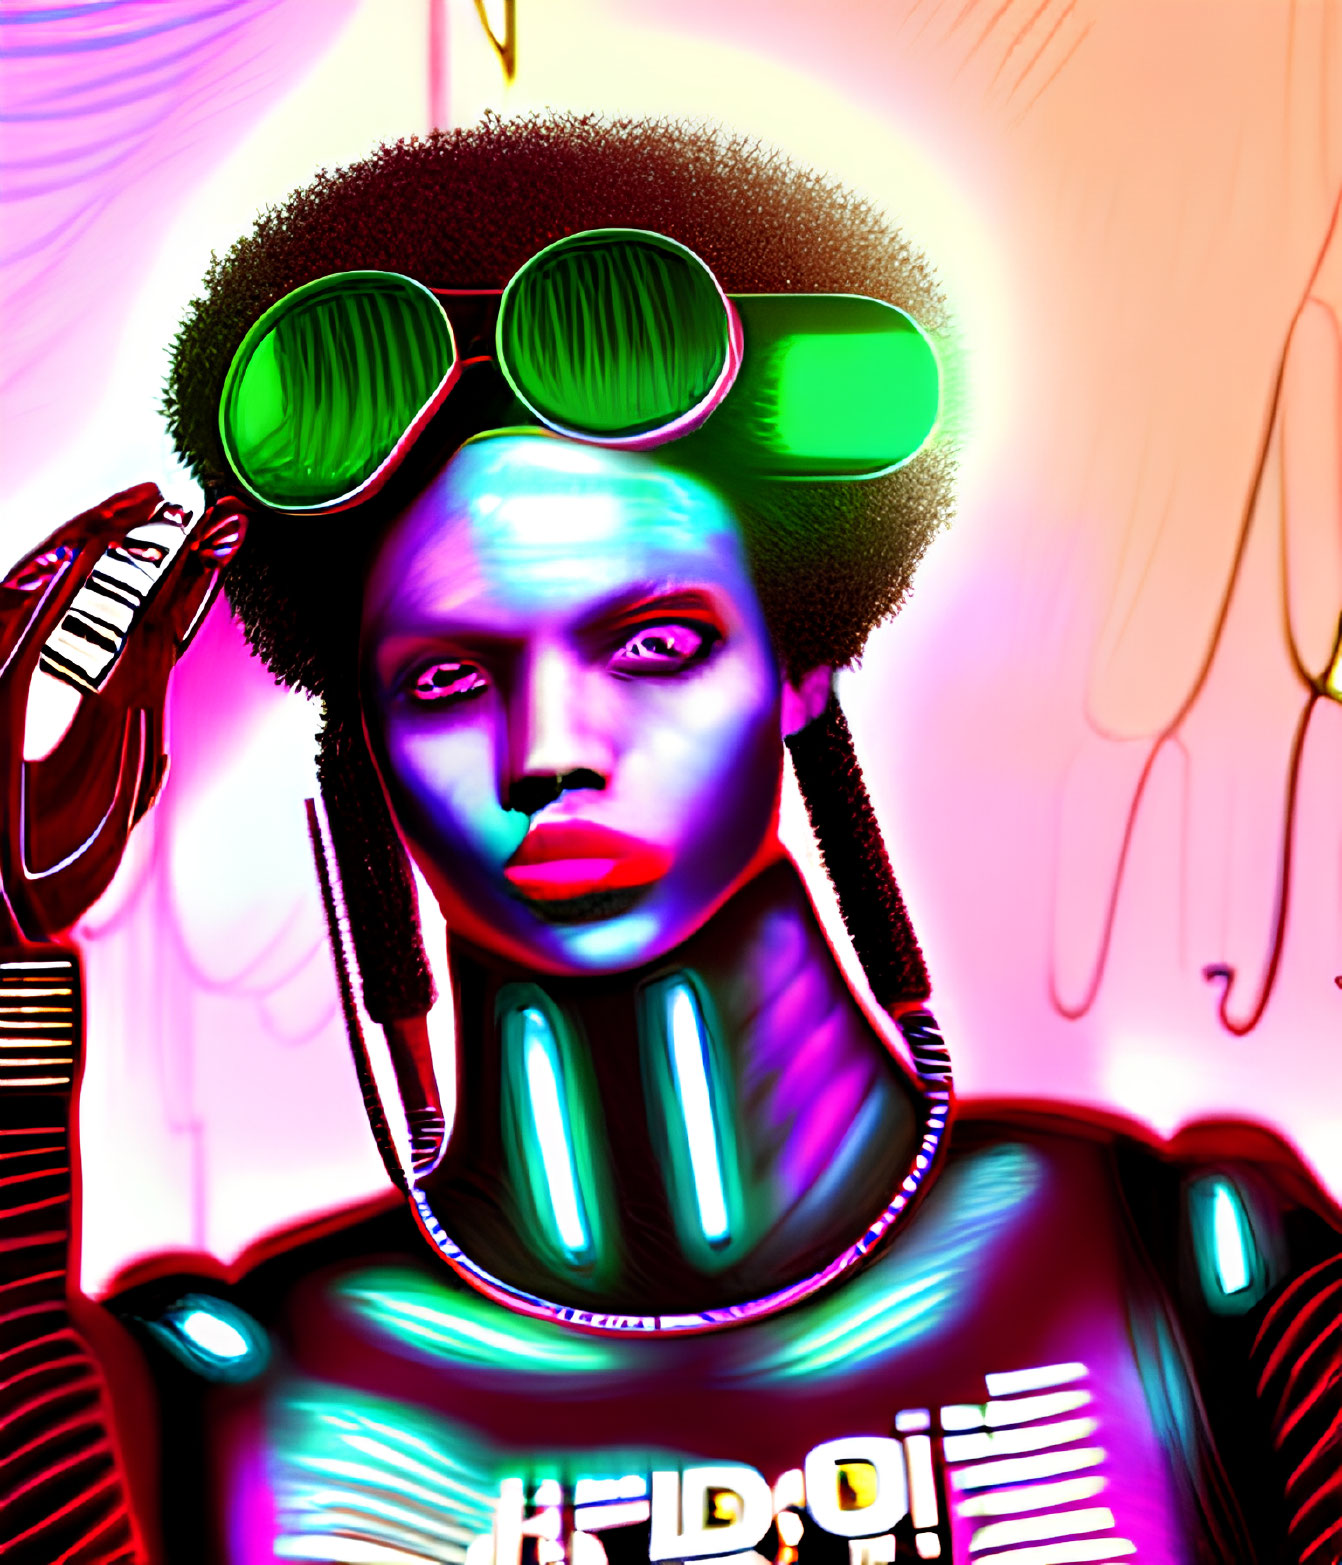 Vibrant digital art: futuristic figure with green glasses, afro, and cybernetic elements